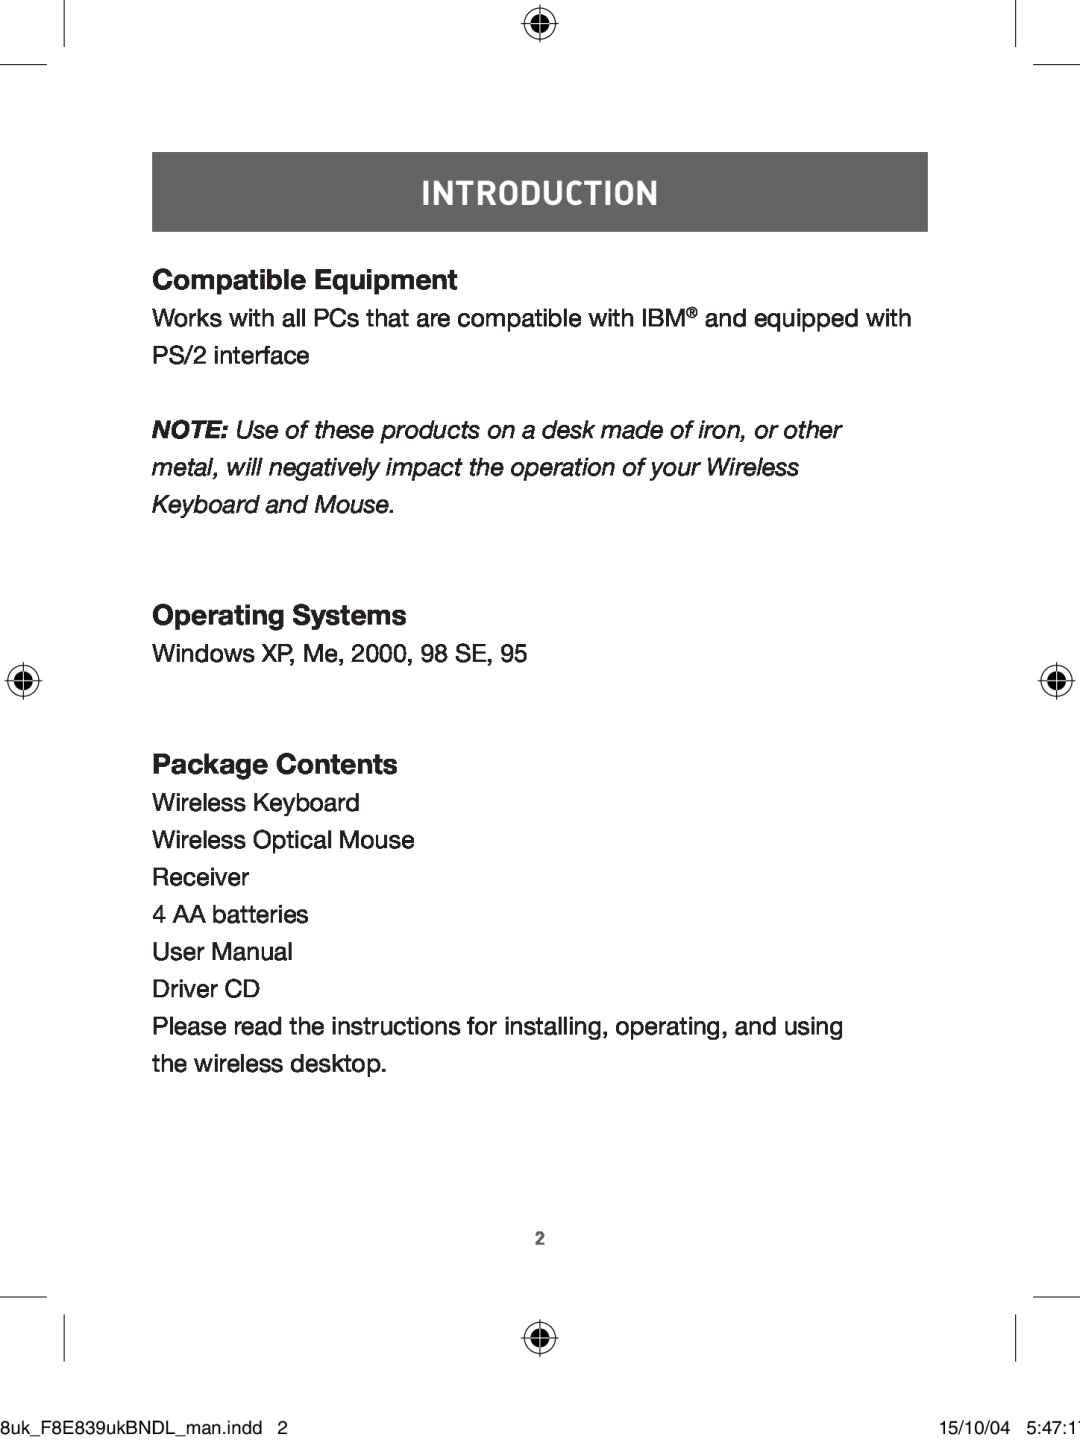 Belkin F8E839UKBNDL user manual Compatible Equipment, Operating Systems, Package Contents, Introduction 